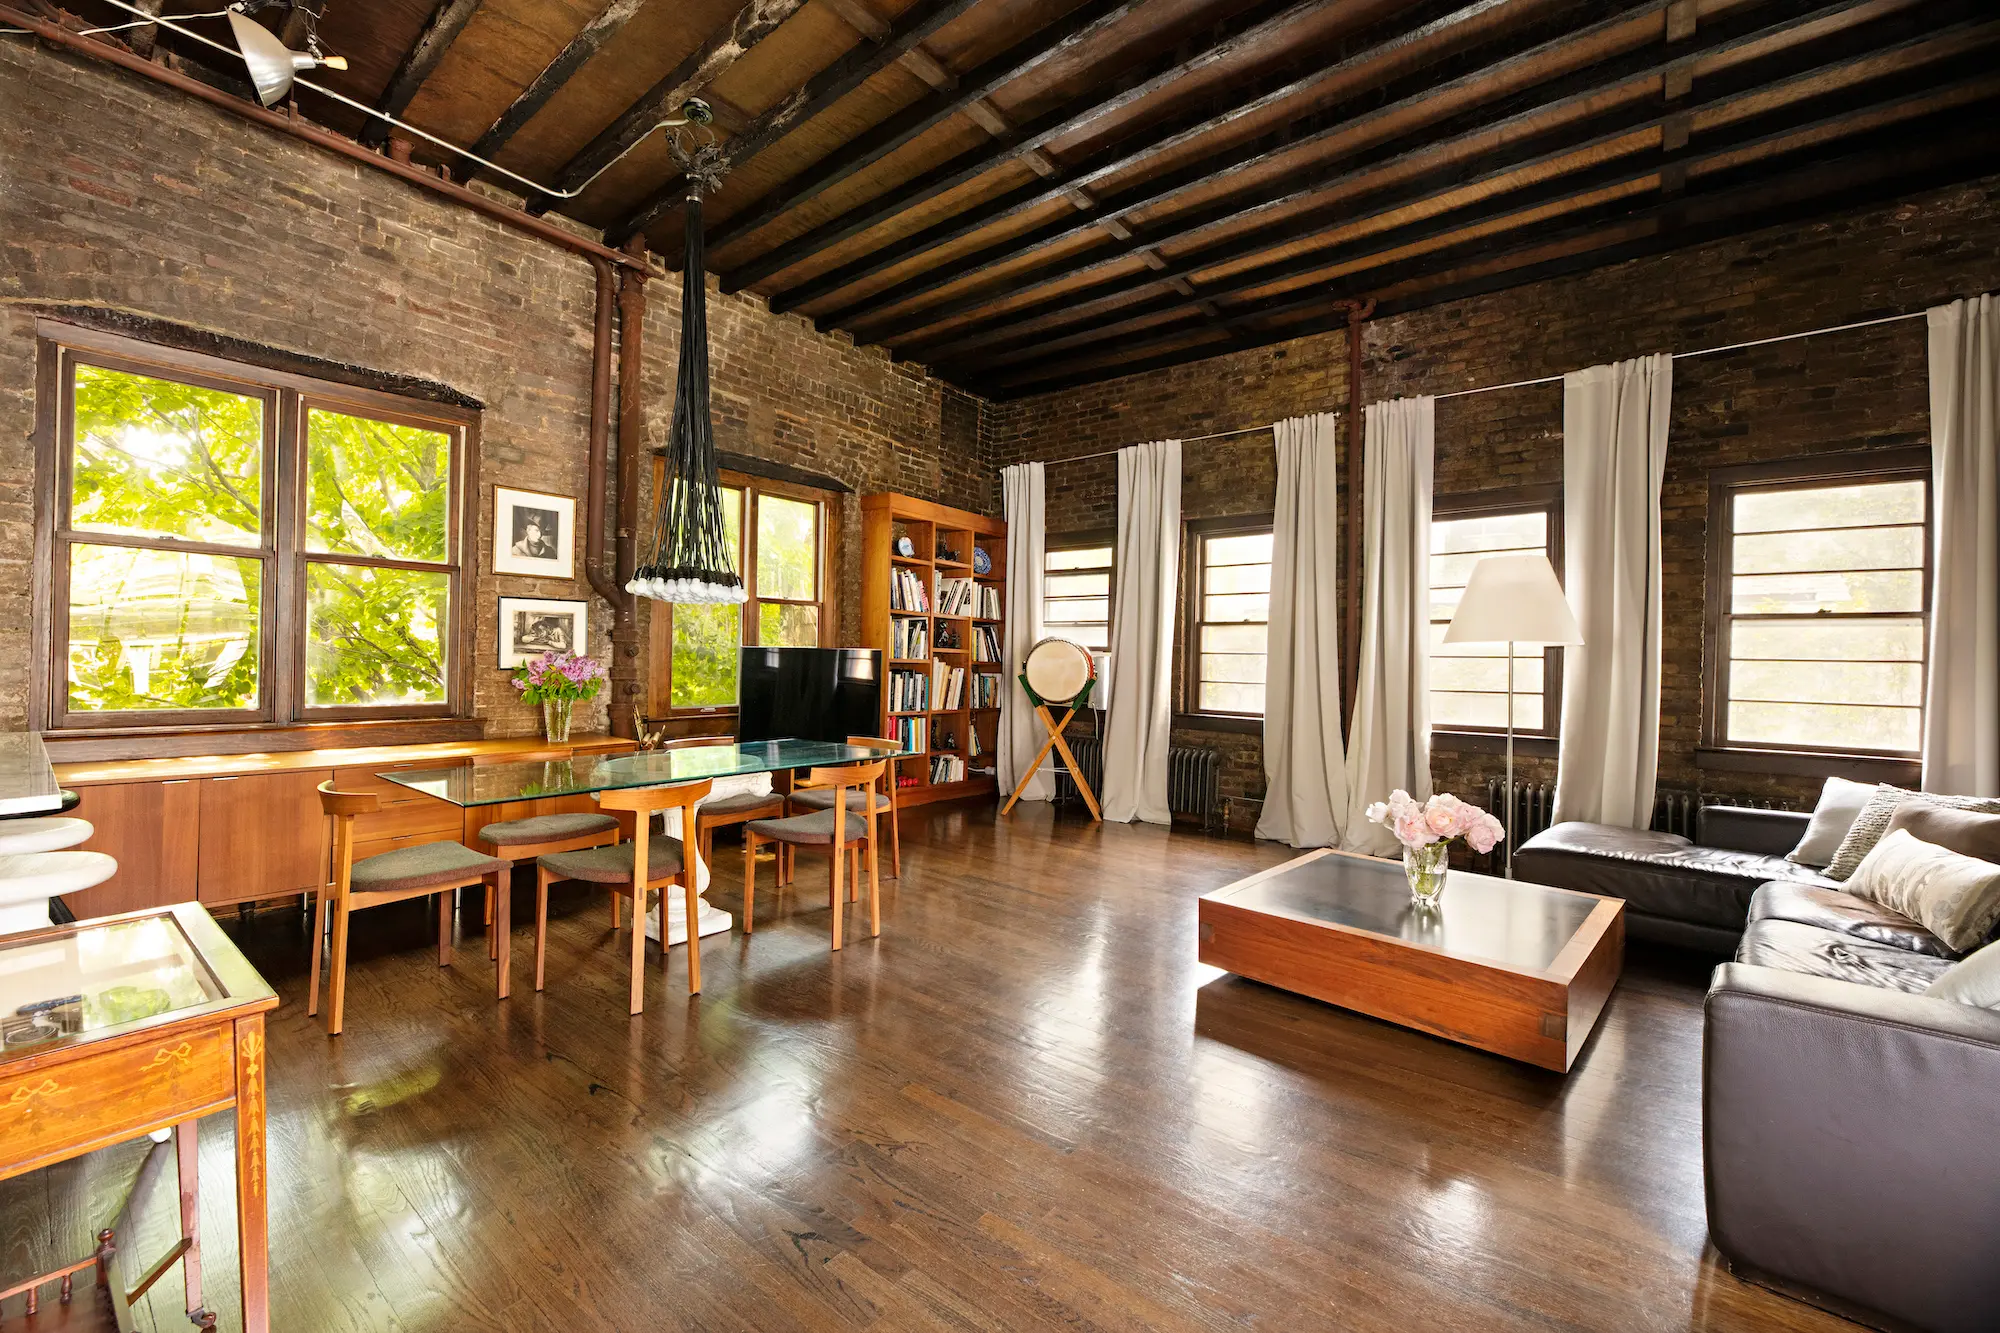 Take a Look Inside This West Village Guest House Designed By the